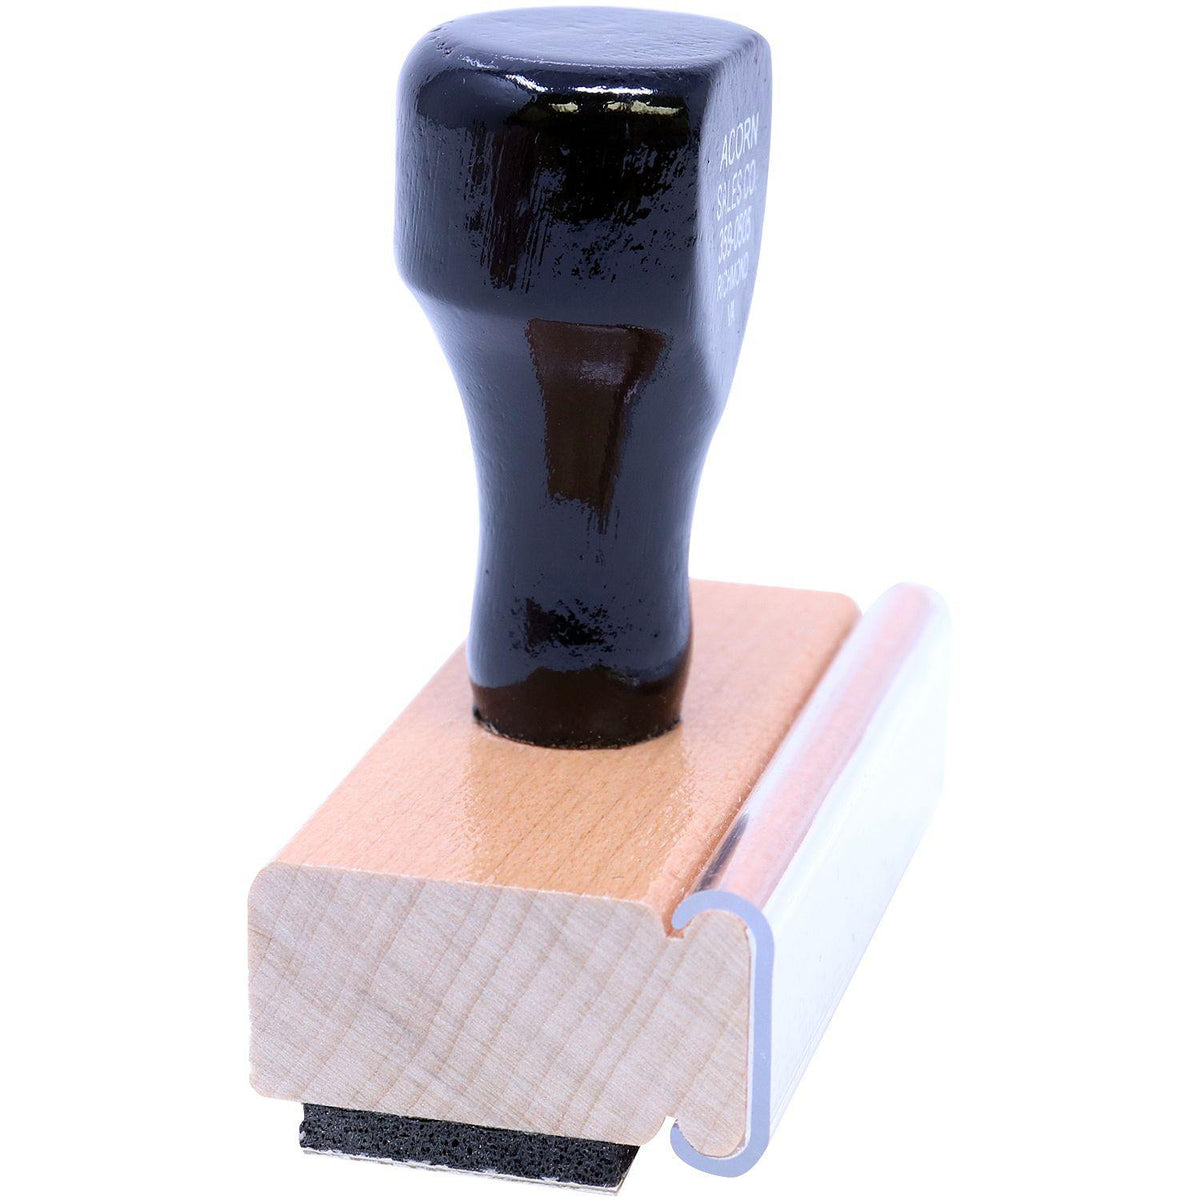 Side View of Large Memo Billed Rubber Stamp at an Angle